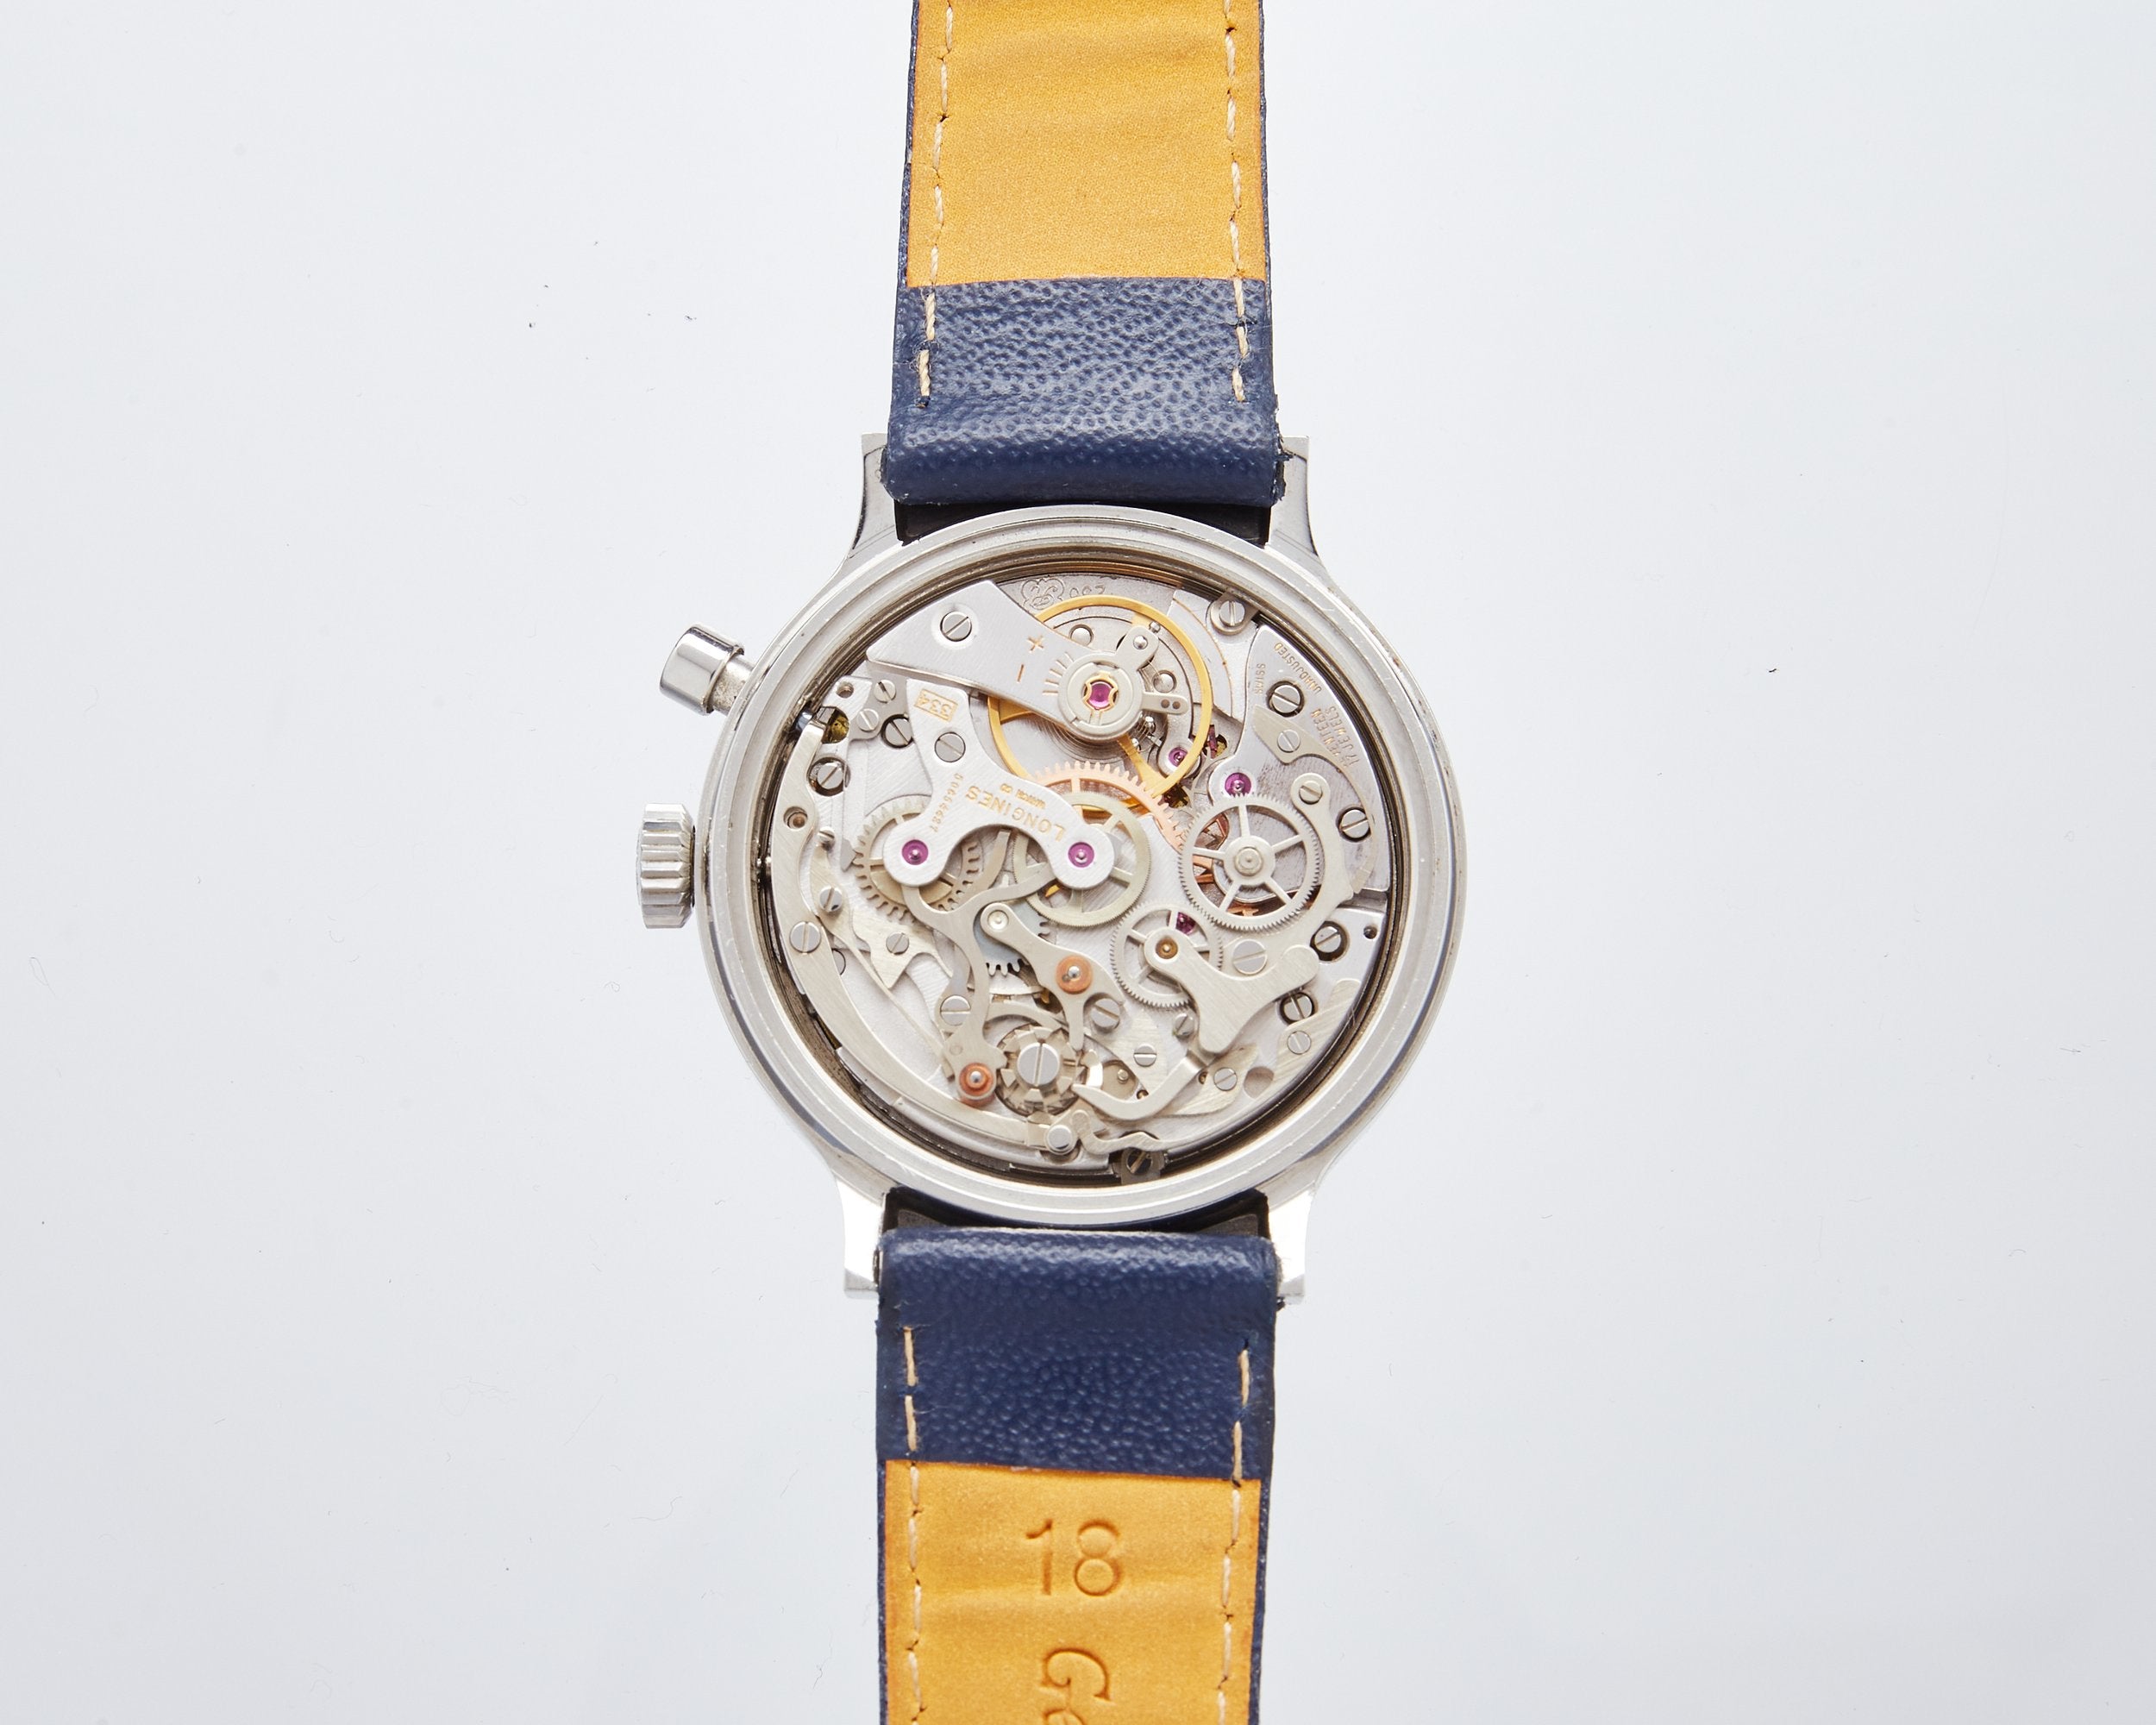 1972 Longines Conquest Monopusher for the Olympic Games (NOS)